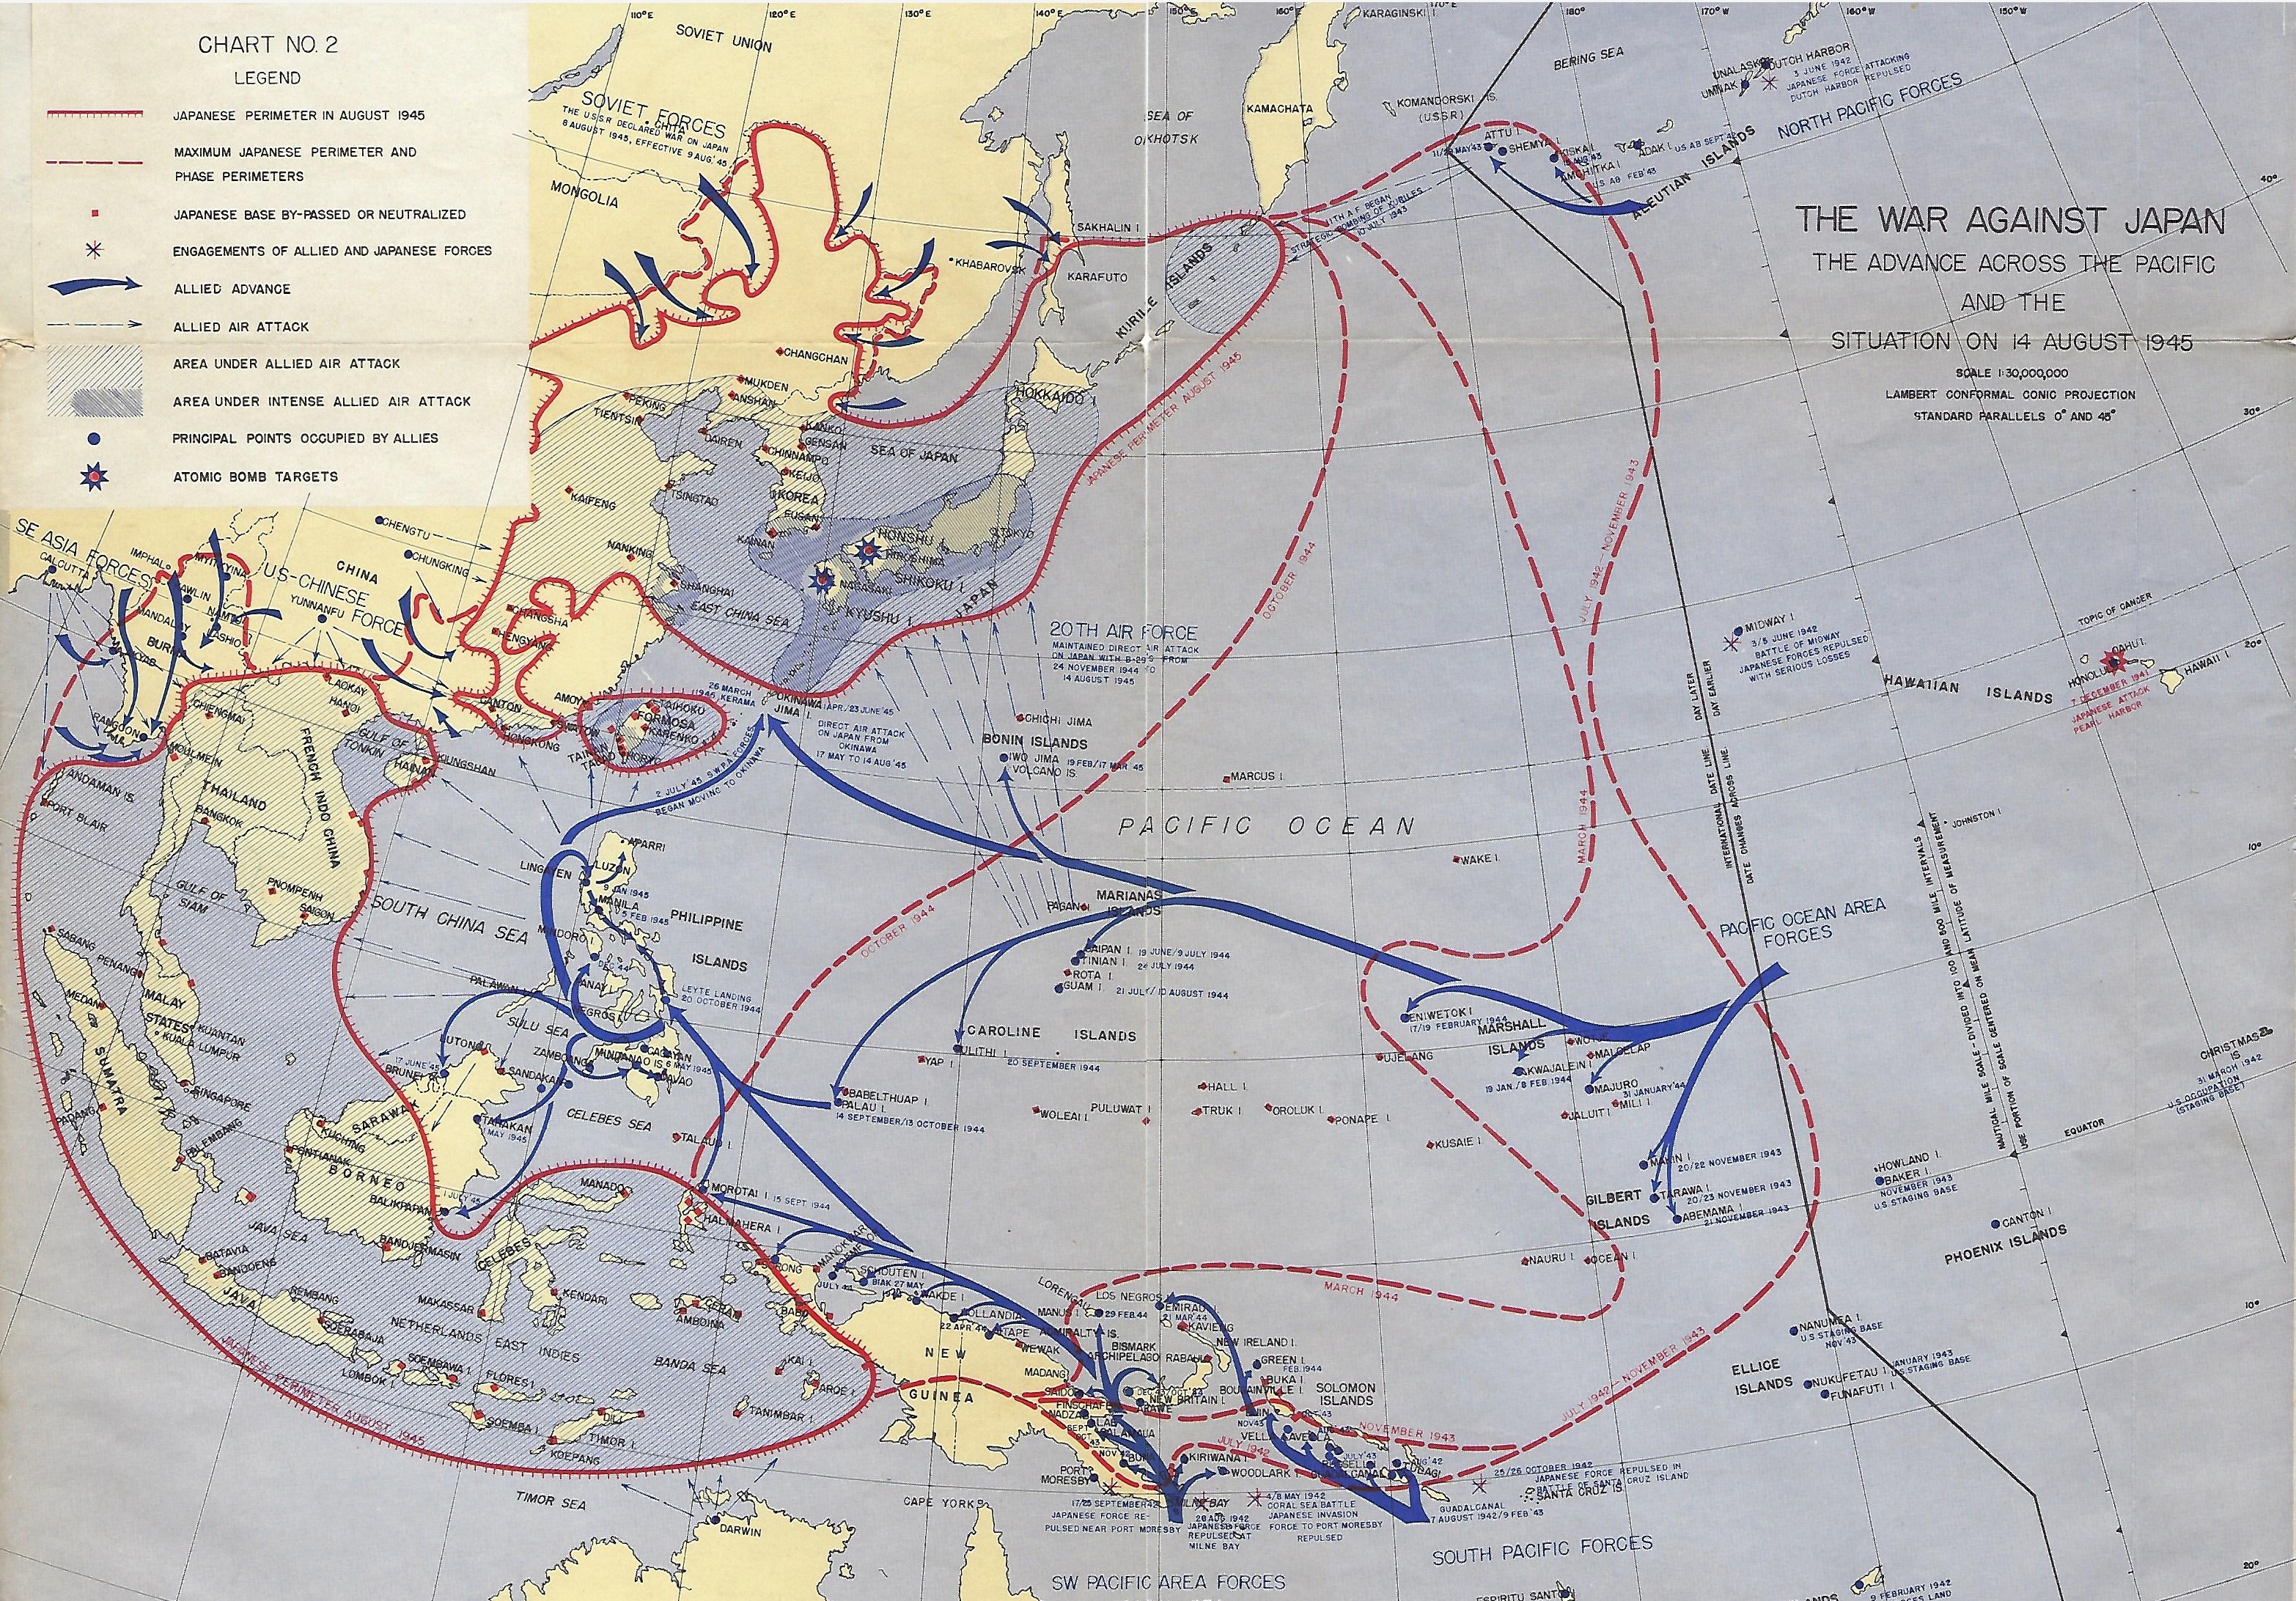 The War Against Japan: The Advance Across the Pacific and the Situation on 14 August, 1945